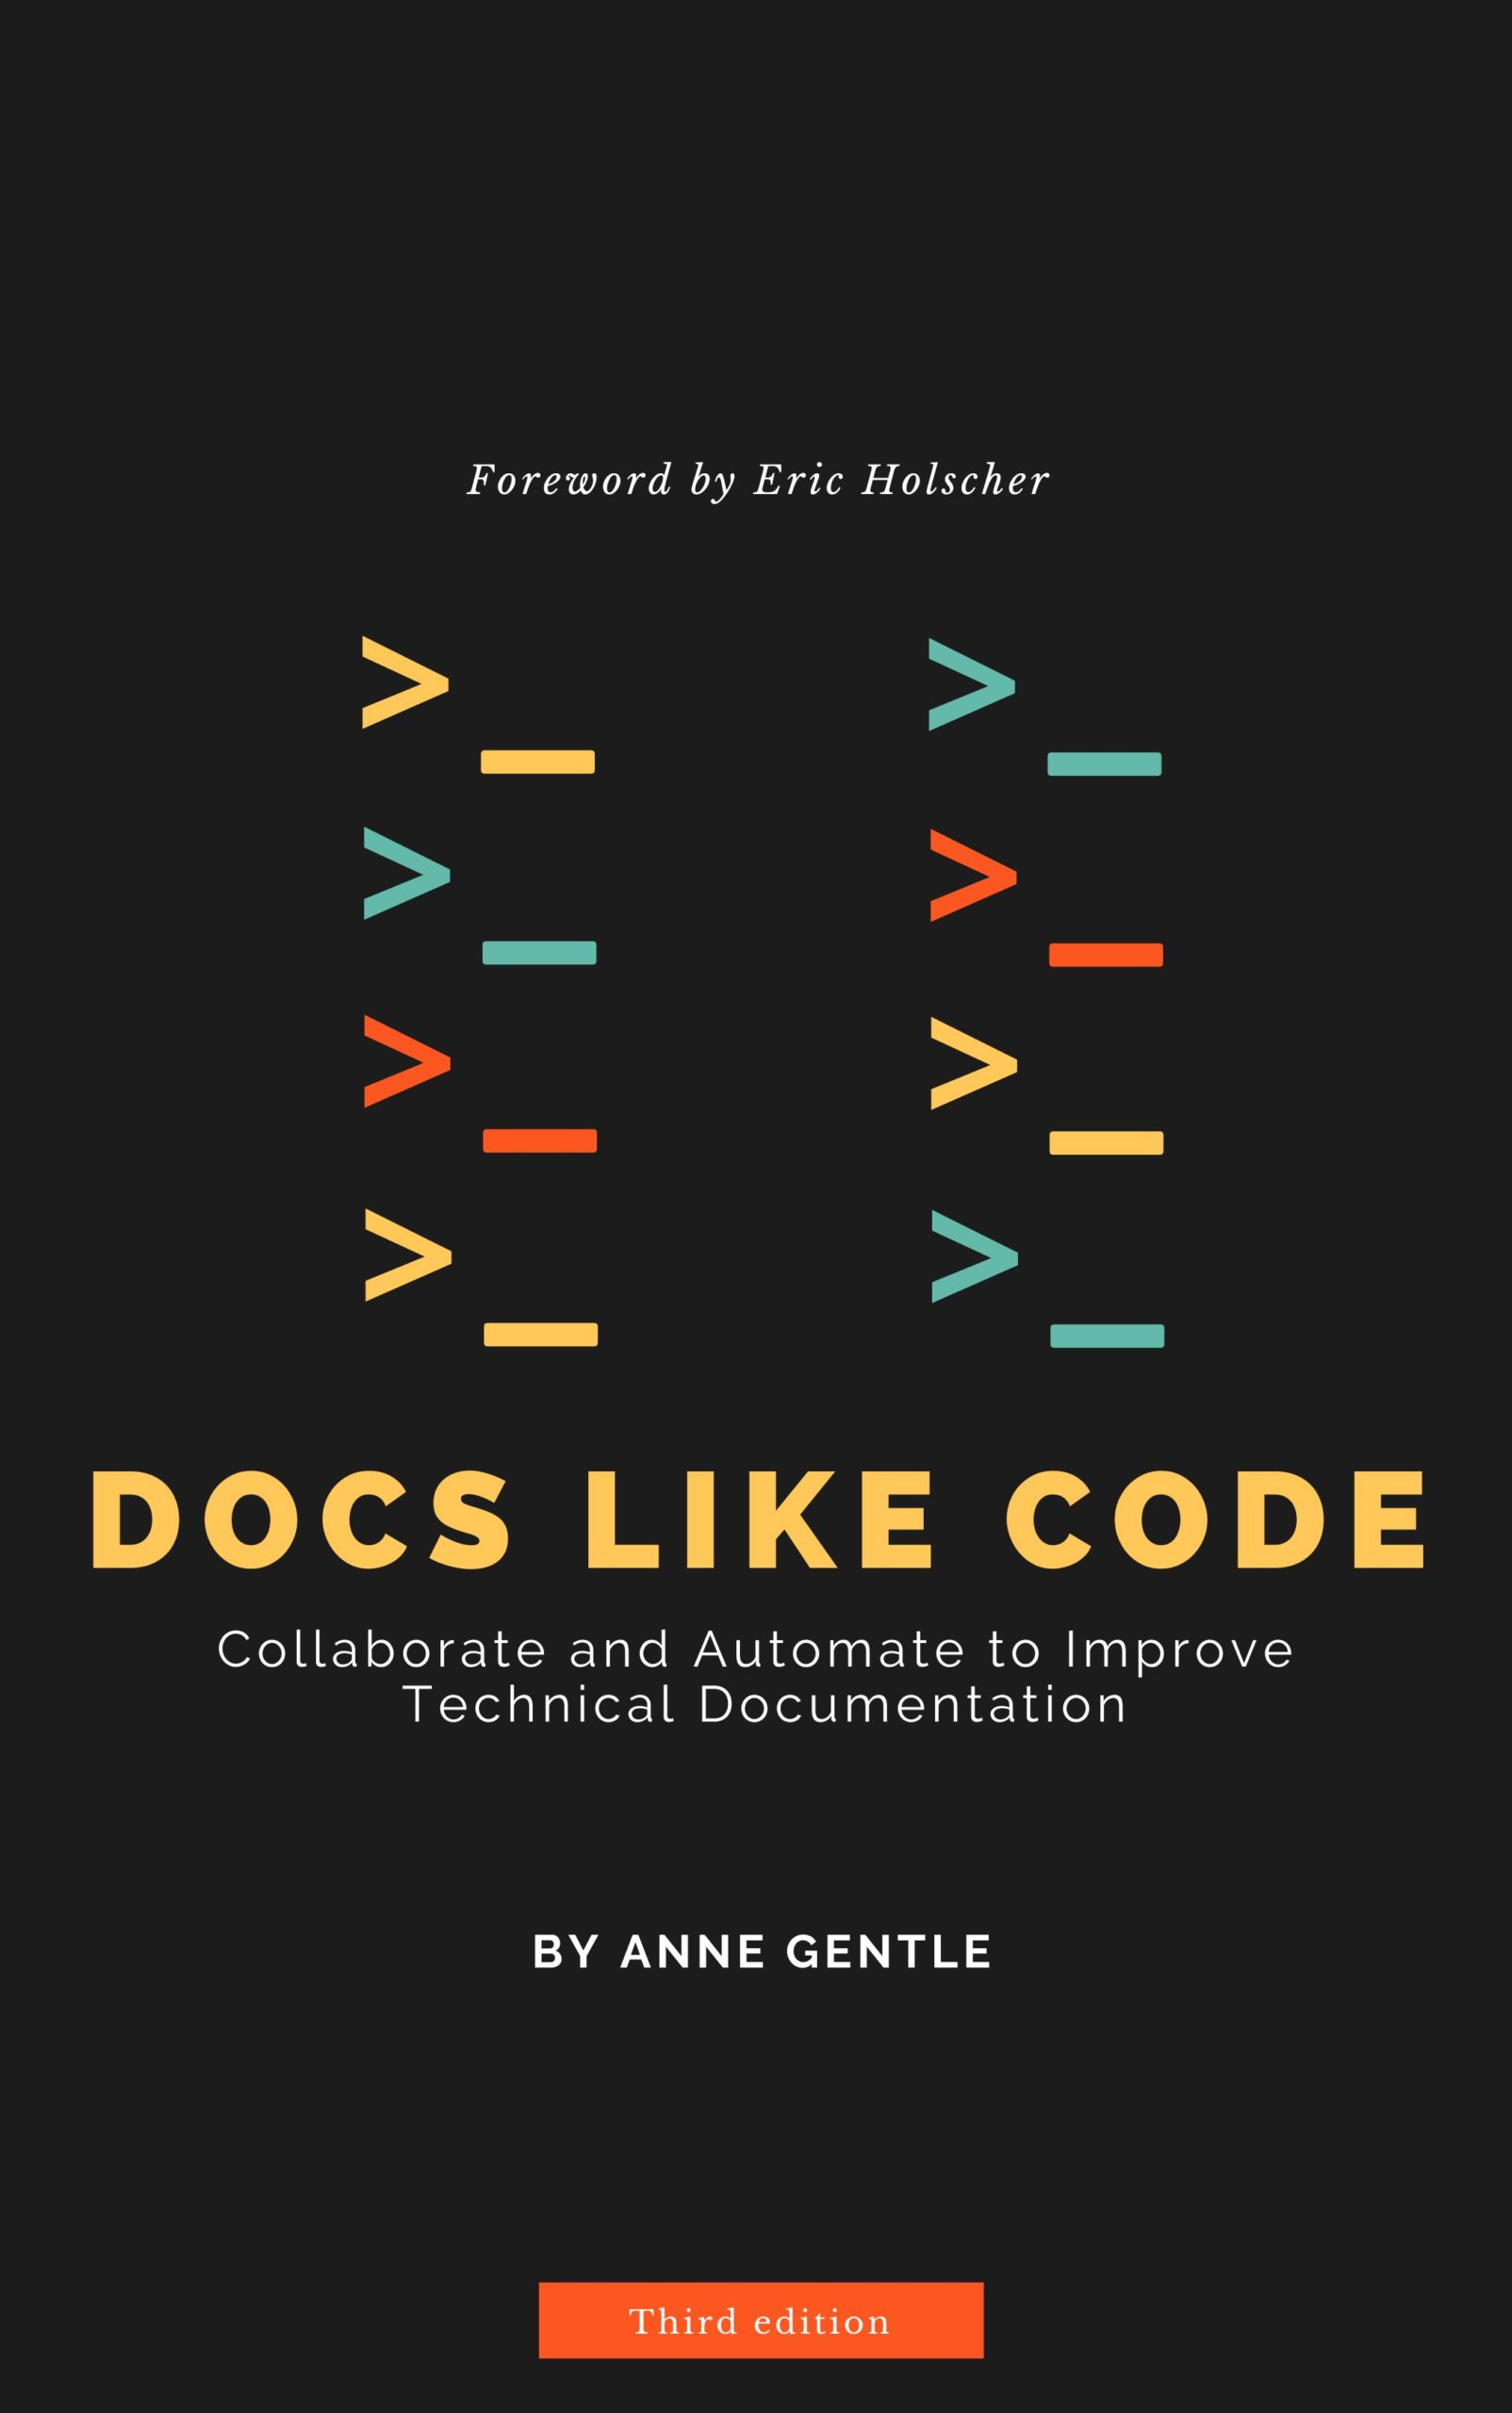 Cover for Docs Like Code book